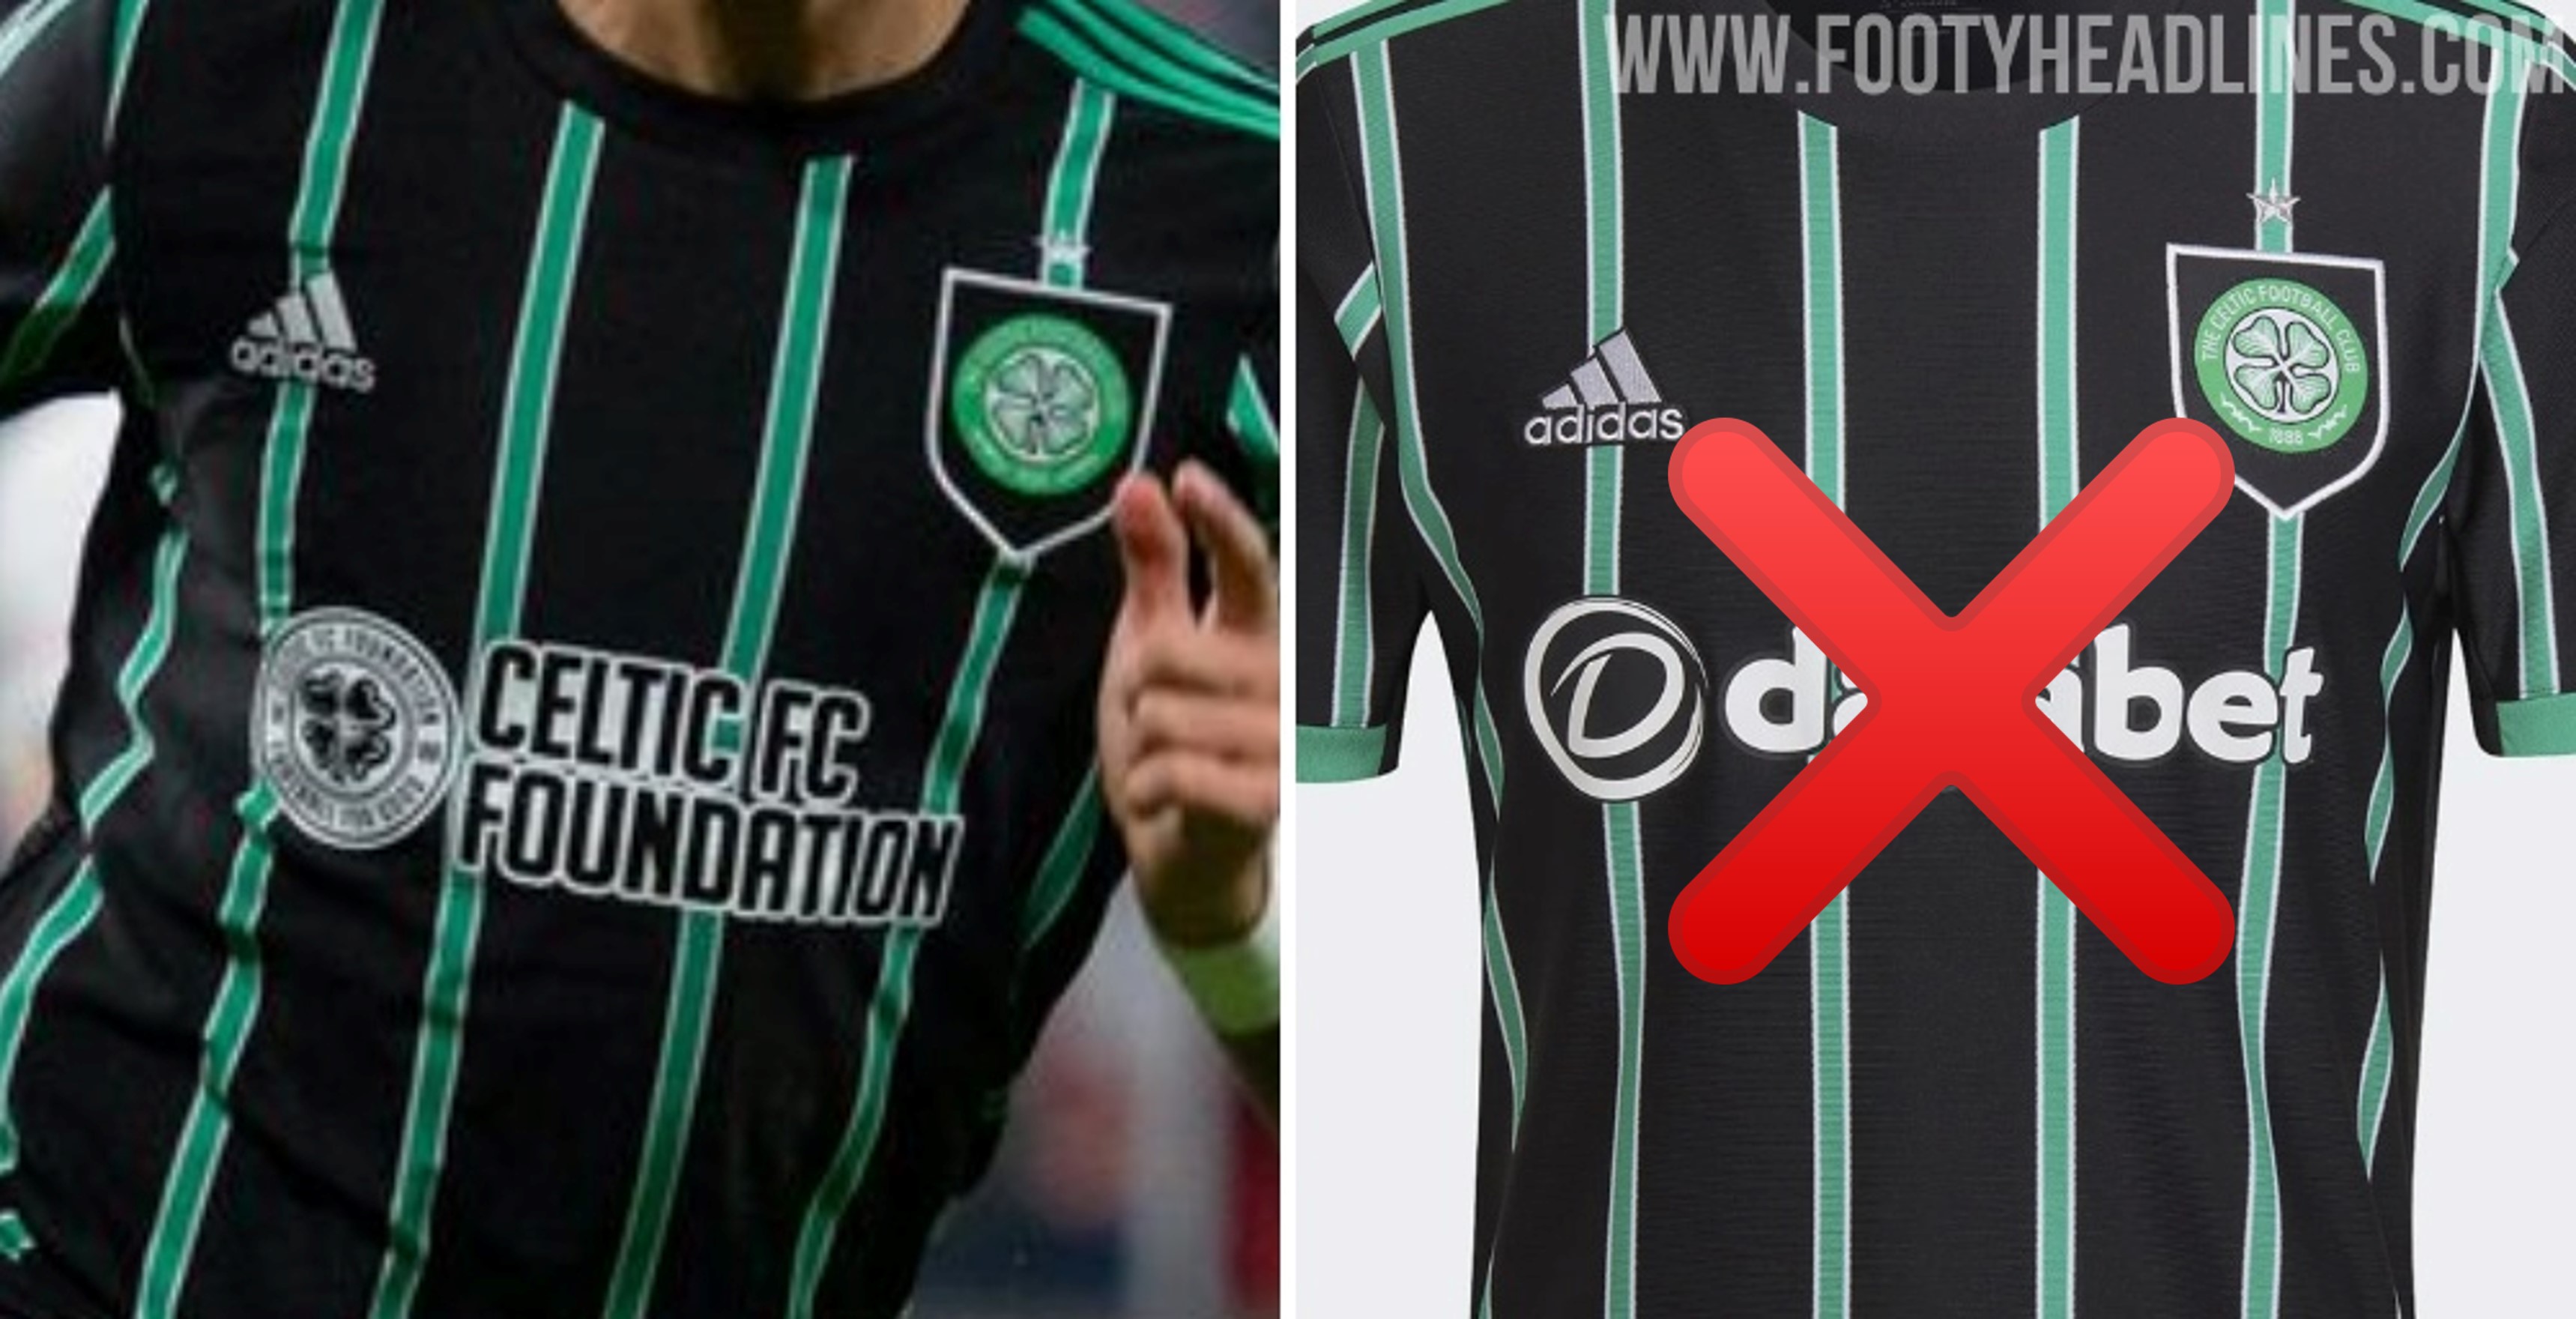 celtic fc kit concepts, replaced the betting sponsor with the Celtic name.  : r/ConceptFootball